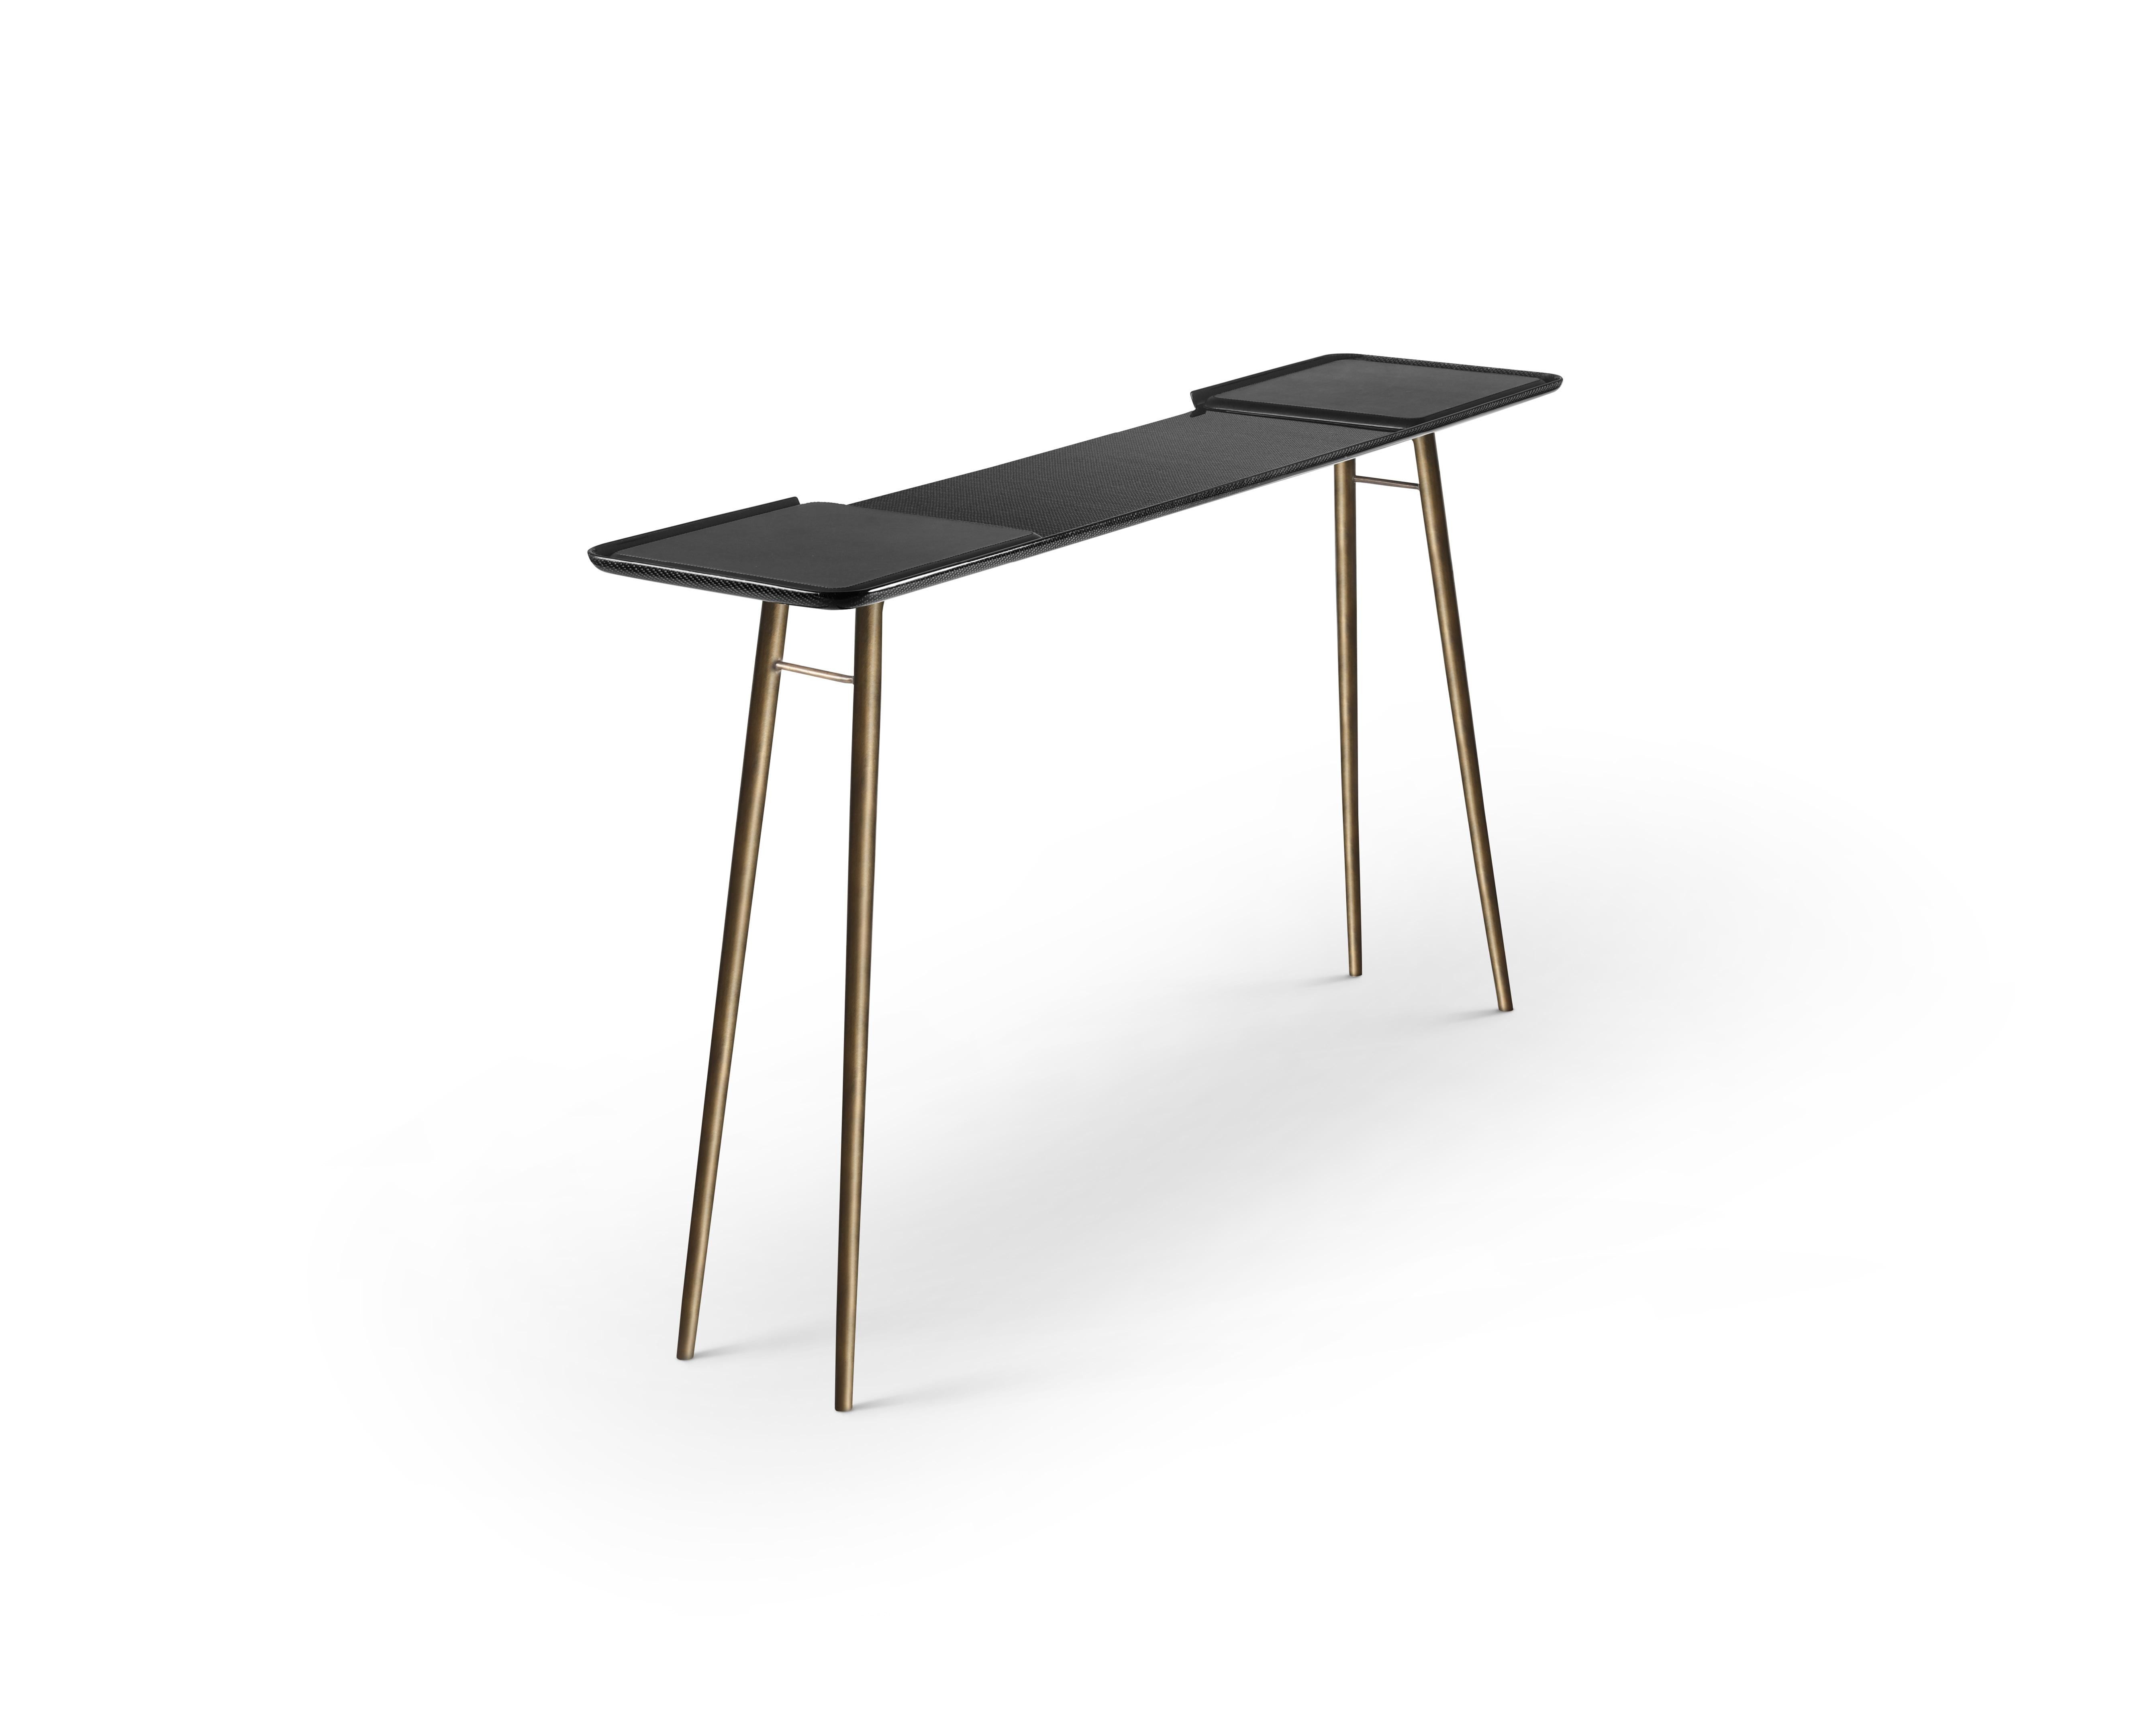 Turned carbon fibre talon console by Madheke.
Dimensions: W 153.5 x D 36.3 x H 88 cm.
Materials: Leather, carbon fibre, cast brass legs.

The Talon's signature black aesthetic makes this console table an understated vision. The striking clean